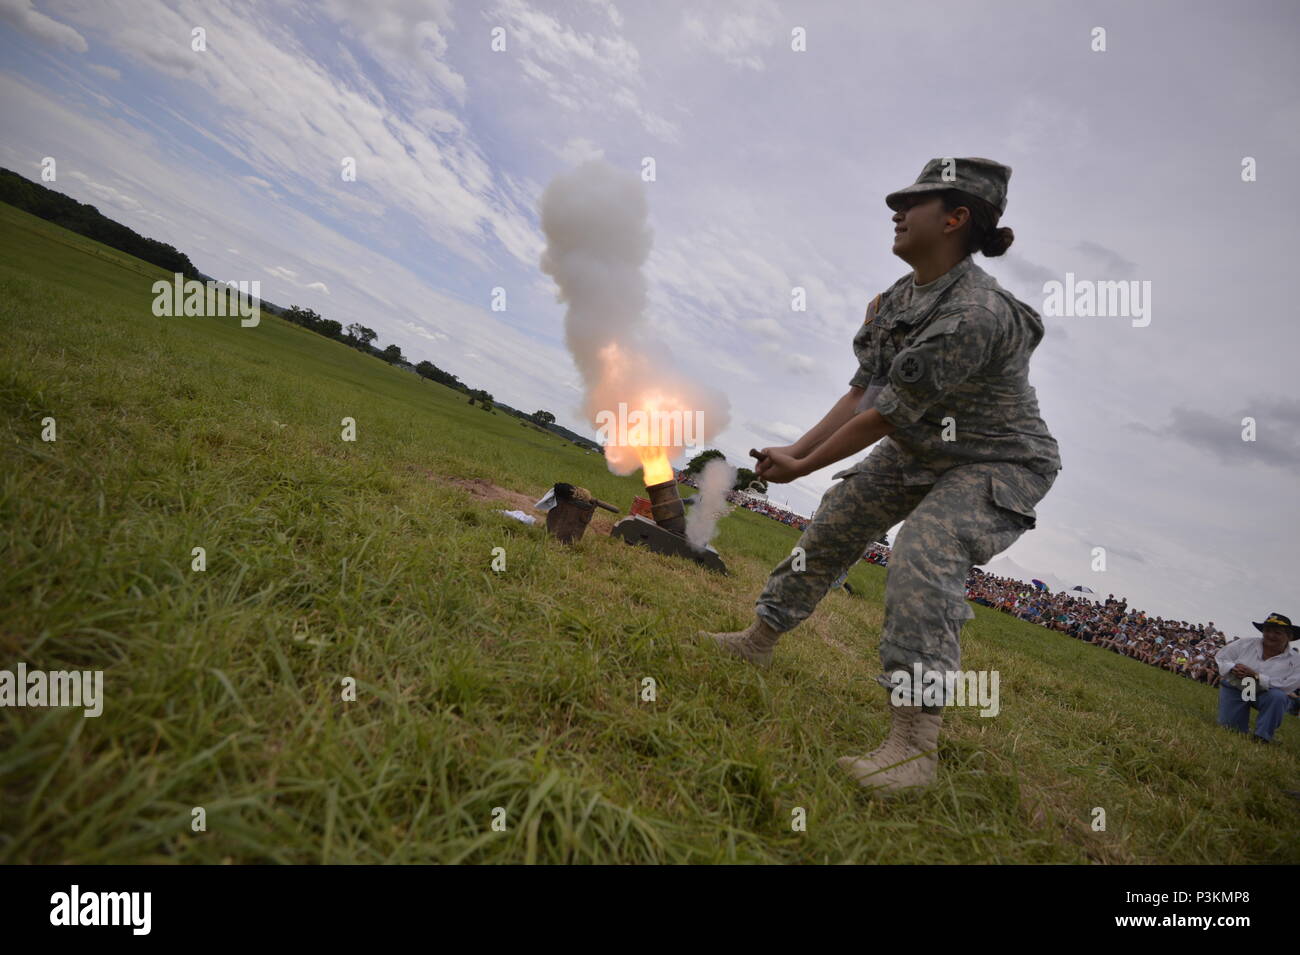 GETTYSBURG, PA - Private First Class Analise Arvelo, a Combat Medic with the 865th Army Combat Support Hospital, Ashley Detatchment, pulls the handle on a Civil War-era mortar during a demonstration at the 153rd anniversary of the Battle of Gettysburg on July 3rd, 2016.    The Battle of Gettysburg took place over three days, from July 1–3, 1863, in and around the town of Gettysburg, Pennsylvania. The battle was described as the turning point of the Civil Warm and involved the largest number of casualties of the conflict, ending with over 23,000 casualties on the Union side, and an estimated si Stock Photo